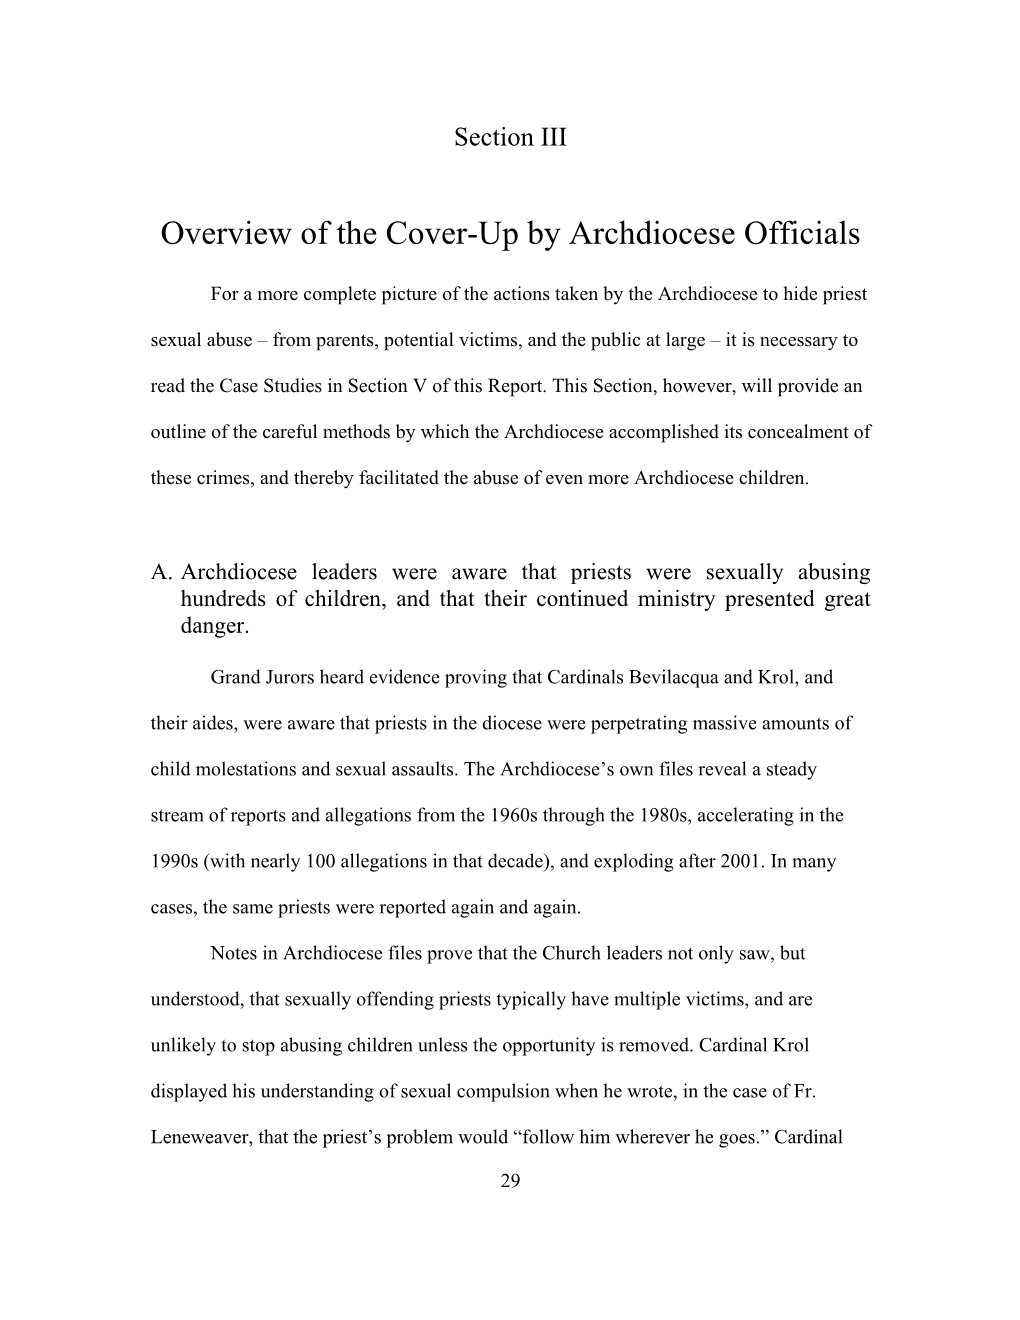 Overview of the Cover-Up by Archdiocese Officials